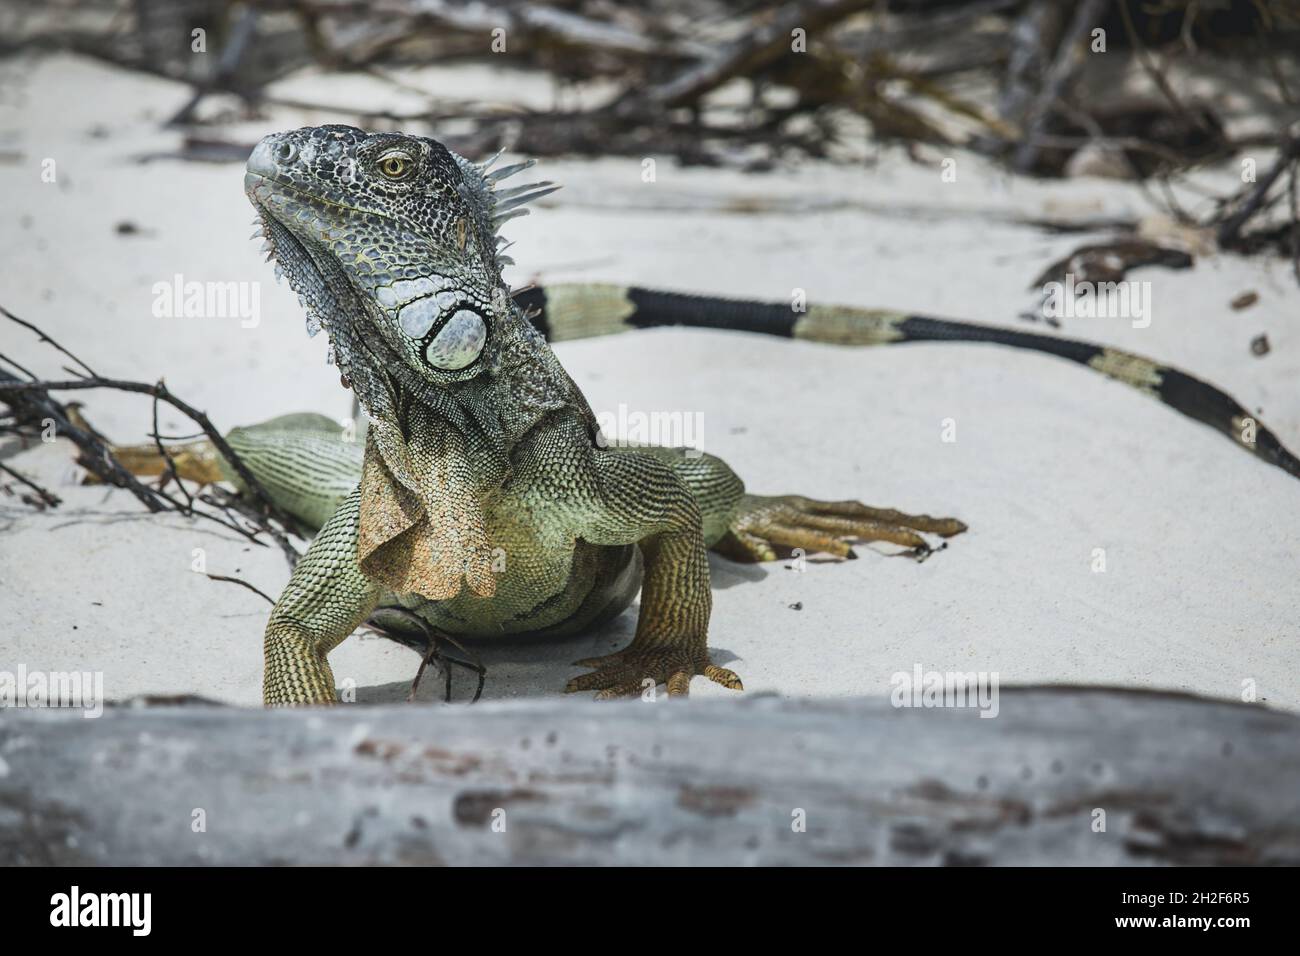 Iguana during vacation sharply focused to show their rugged features, skin patterns and individual personalities Stock Photo